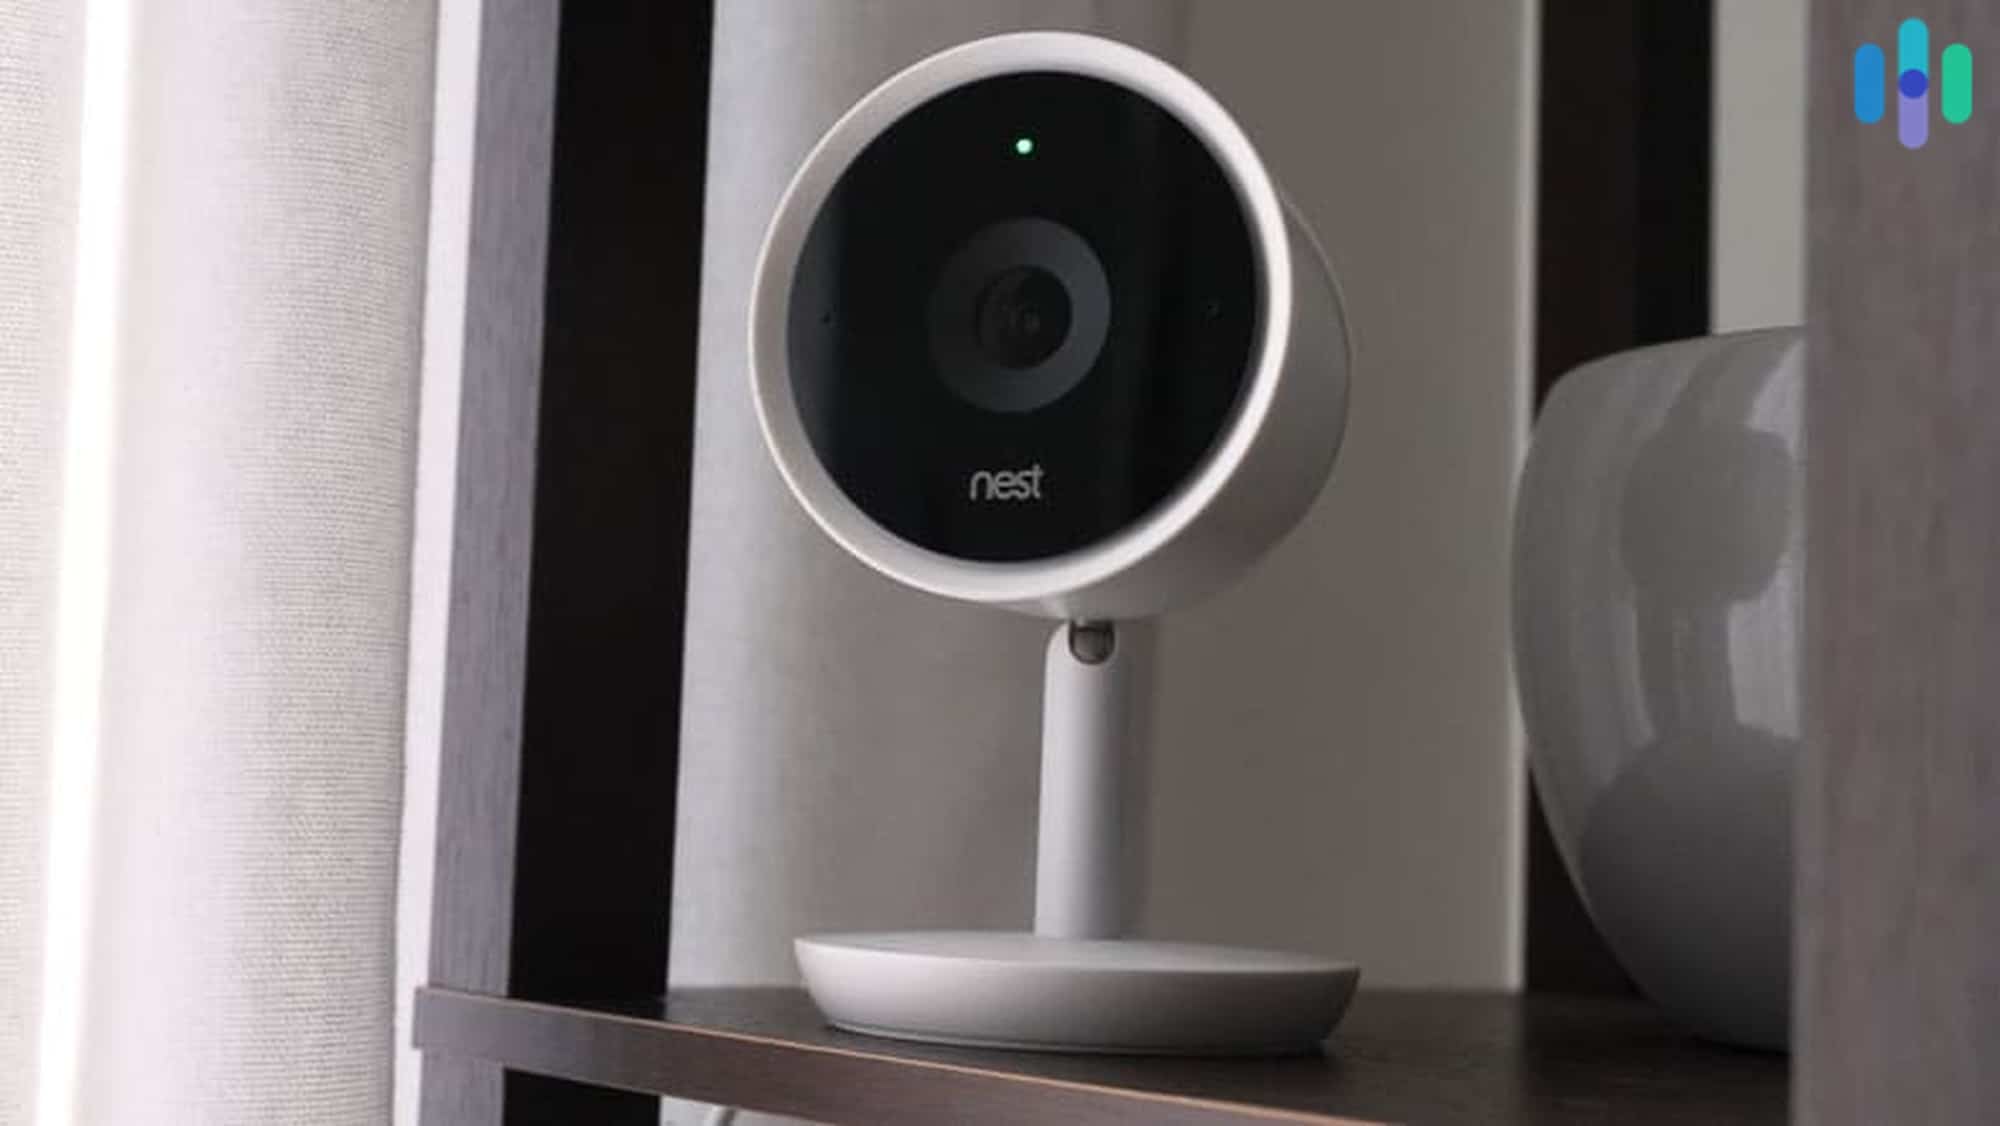 Google's got a new face-tracking camera for your home. We've got